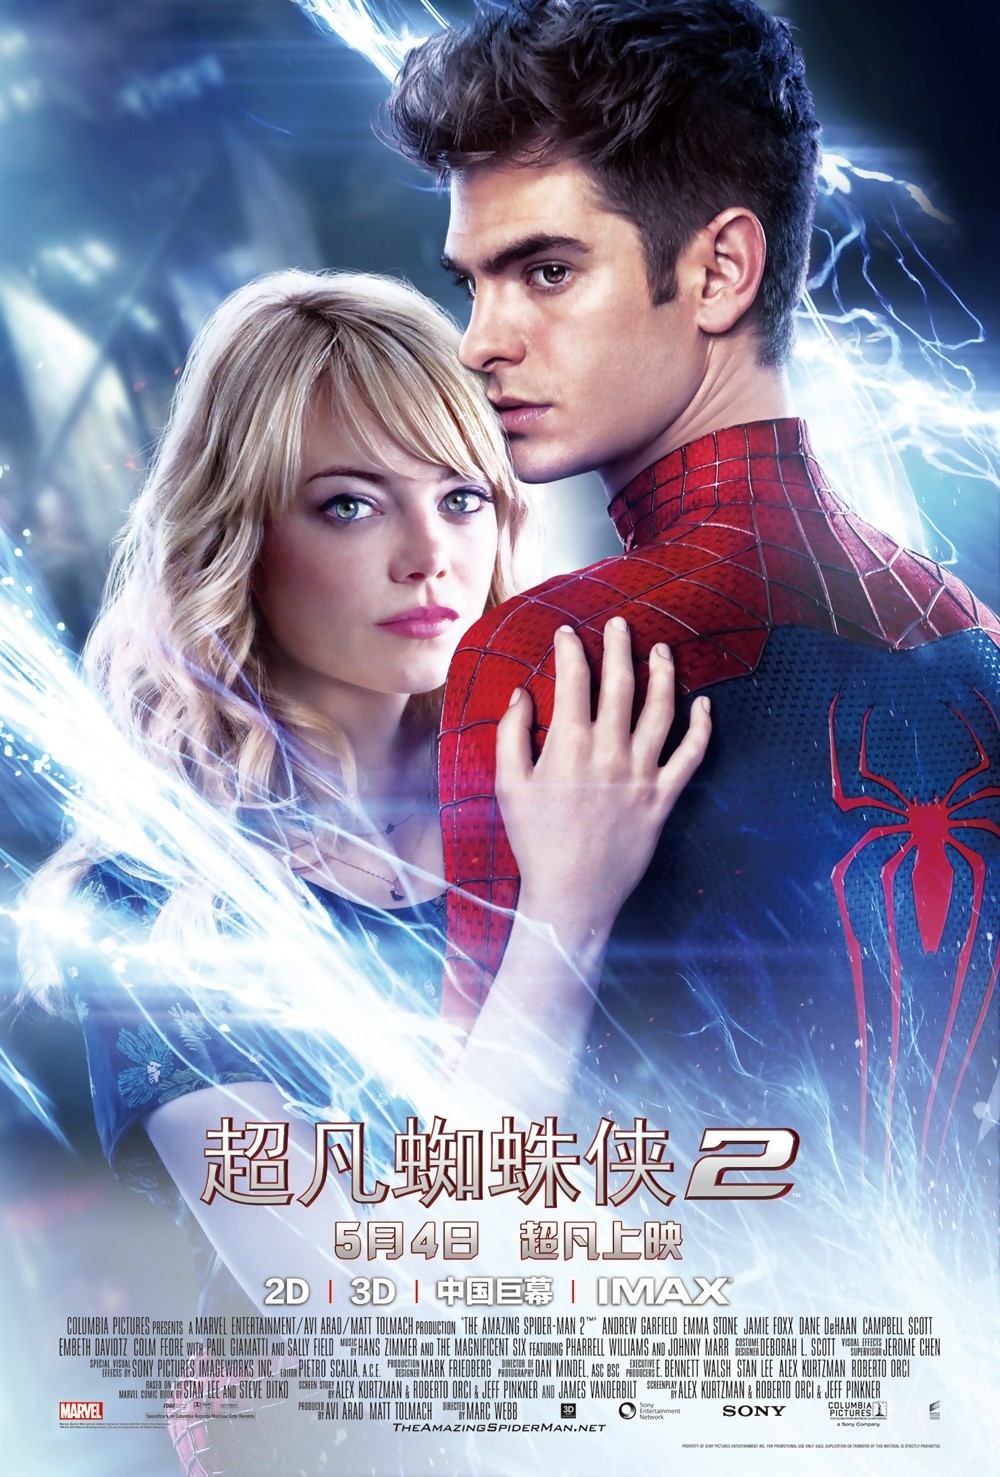 Emma Stone in The Amazing Spider-Man 2